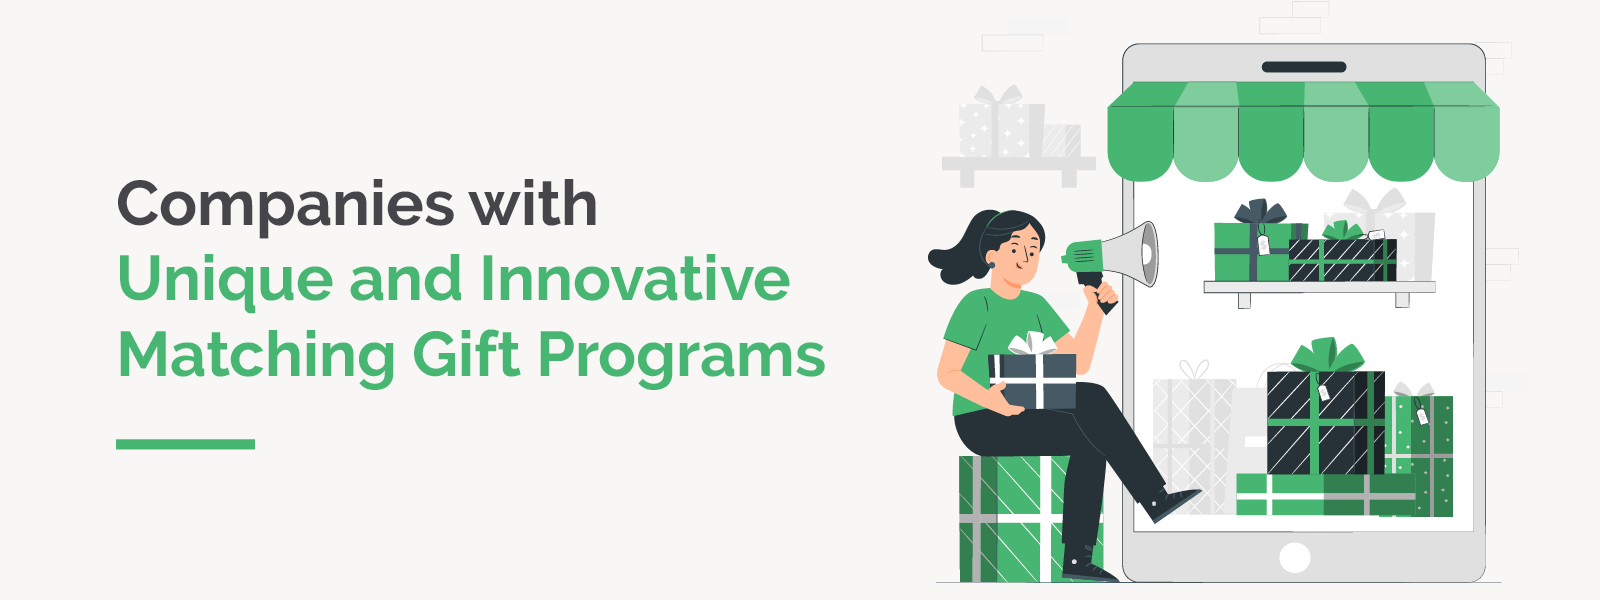 Companies with Innovative and Unique Matching Gift Programs